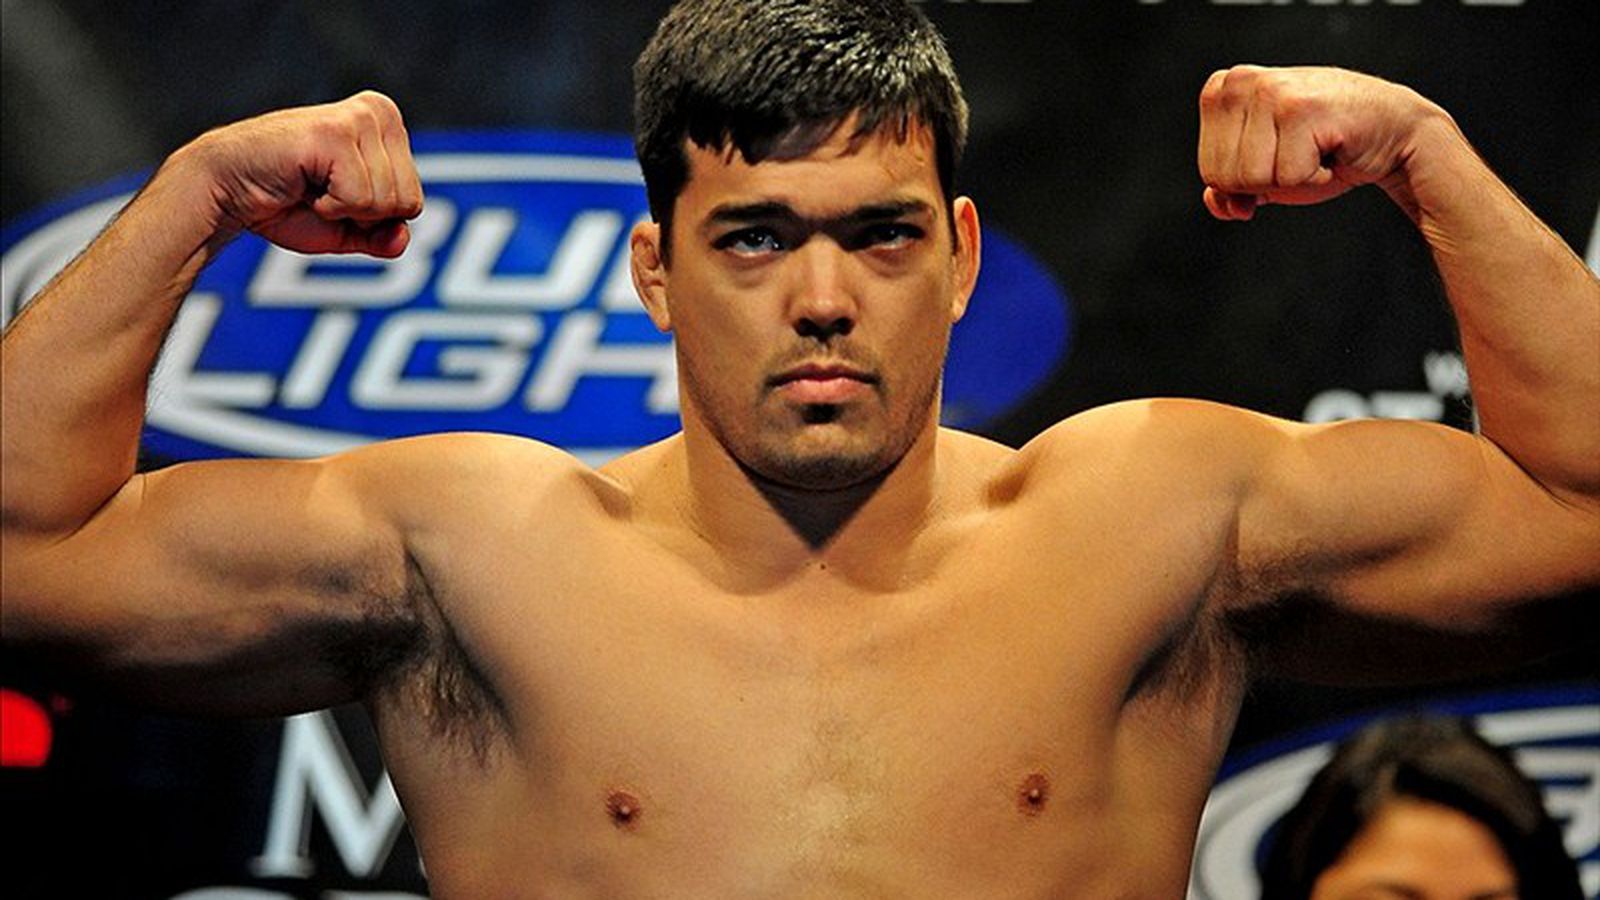 Lyoto Machida was ready to fight at middleweight to 'keep busy